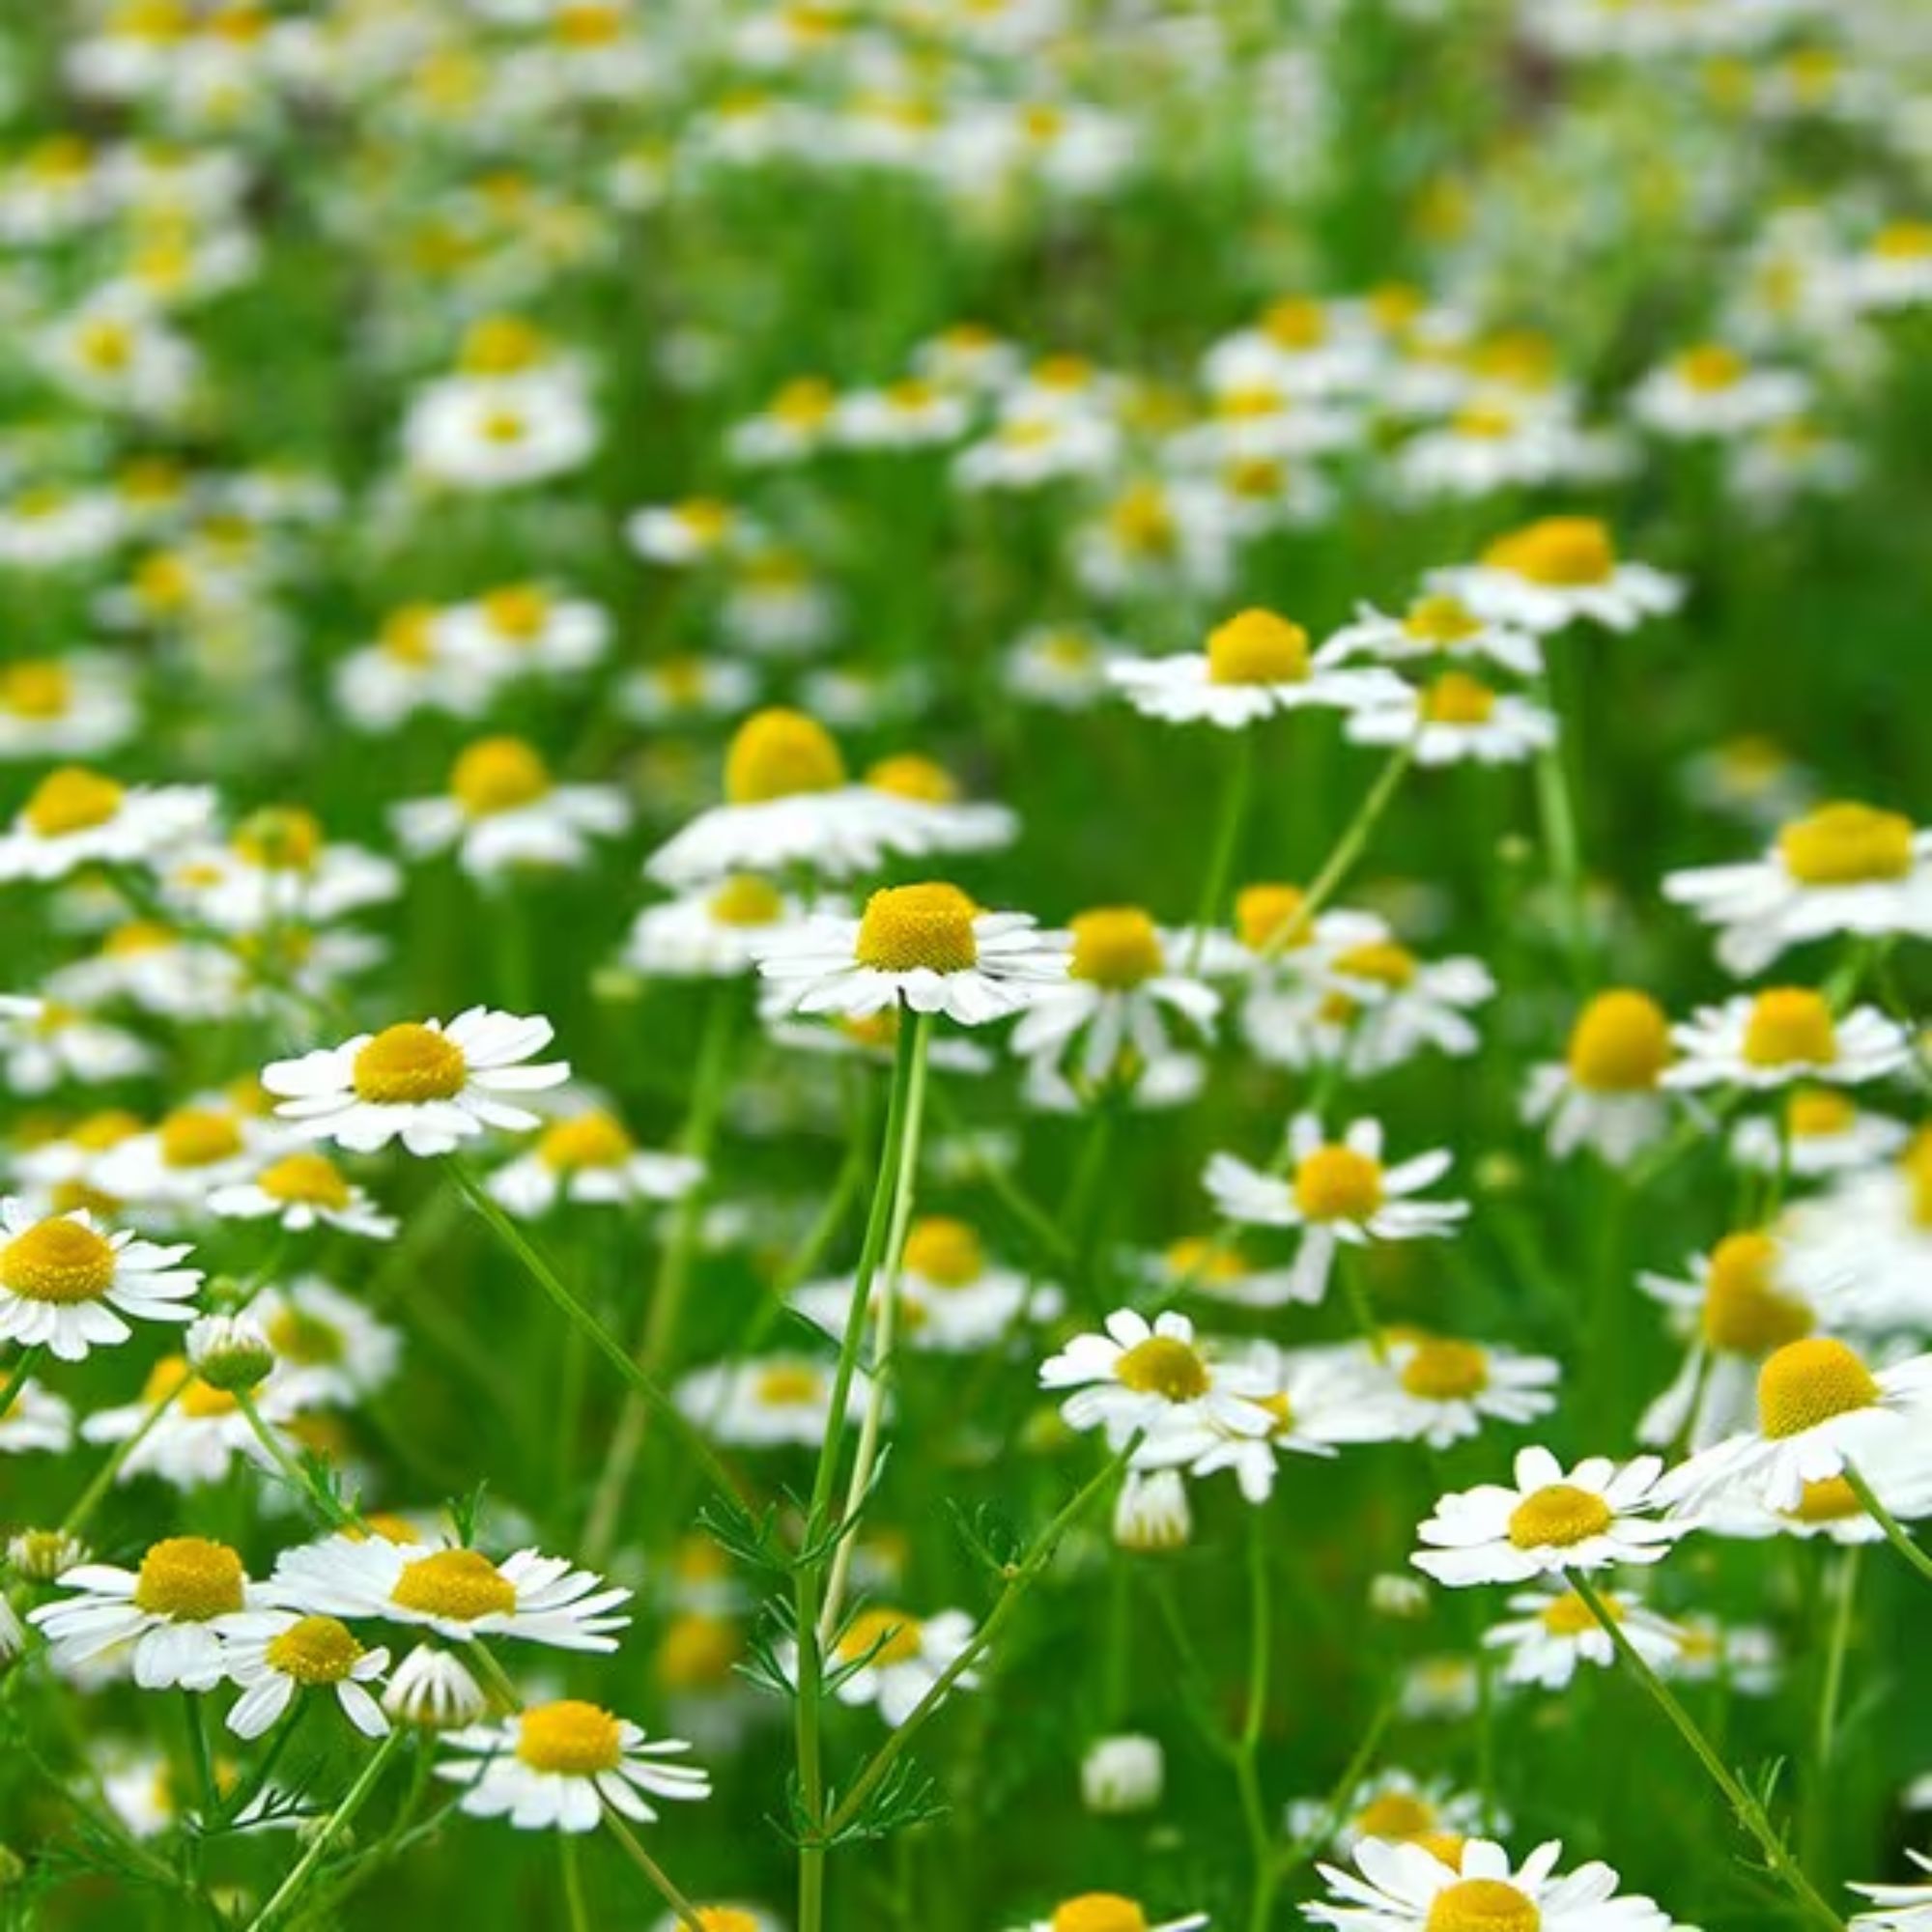 Chamomile lawn options available to buy